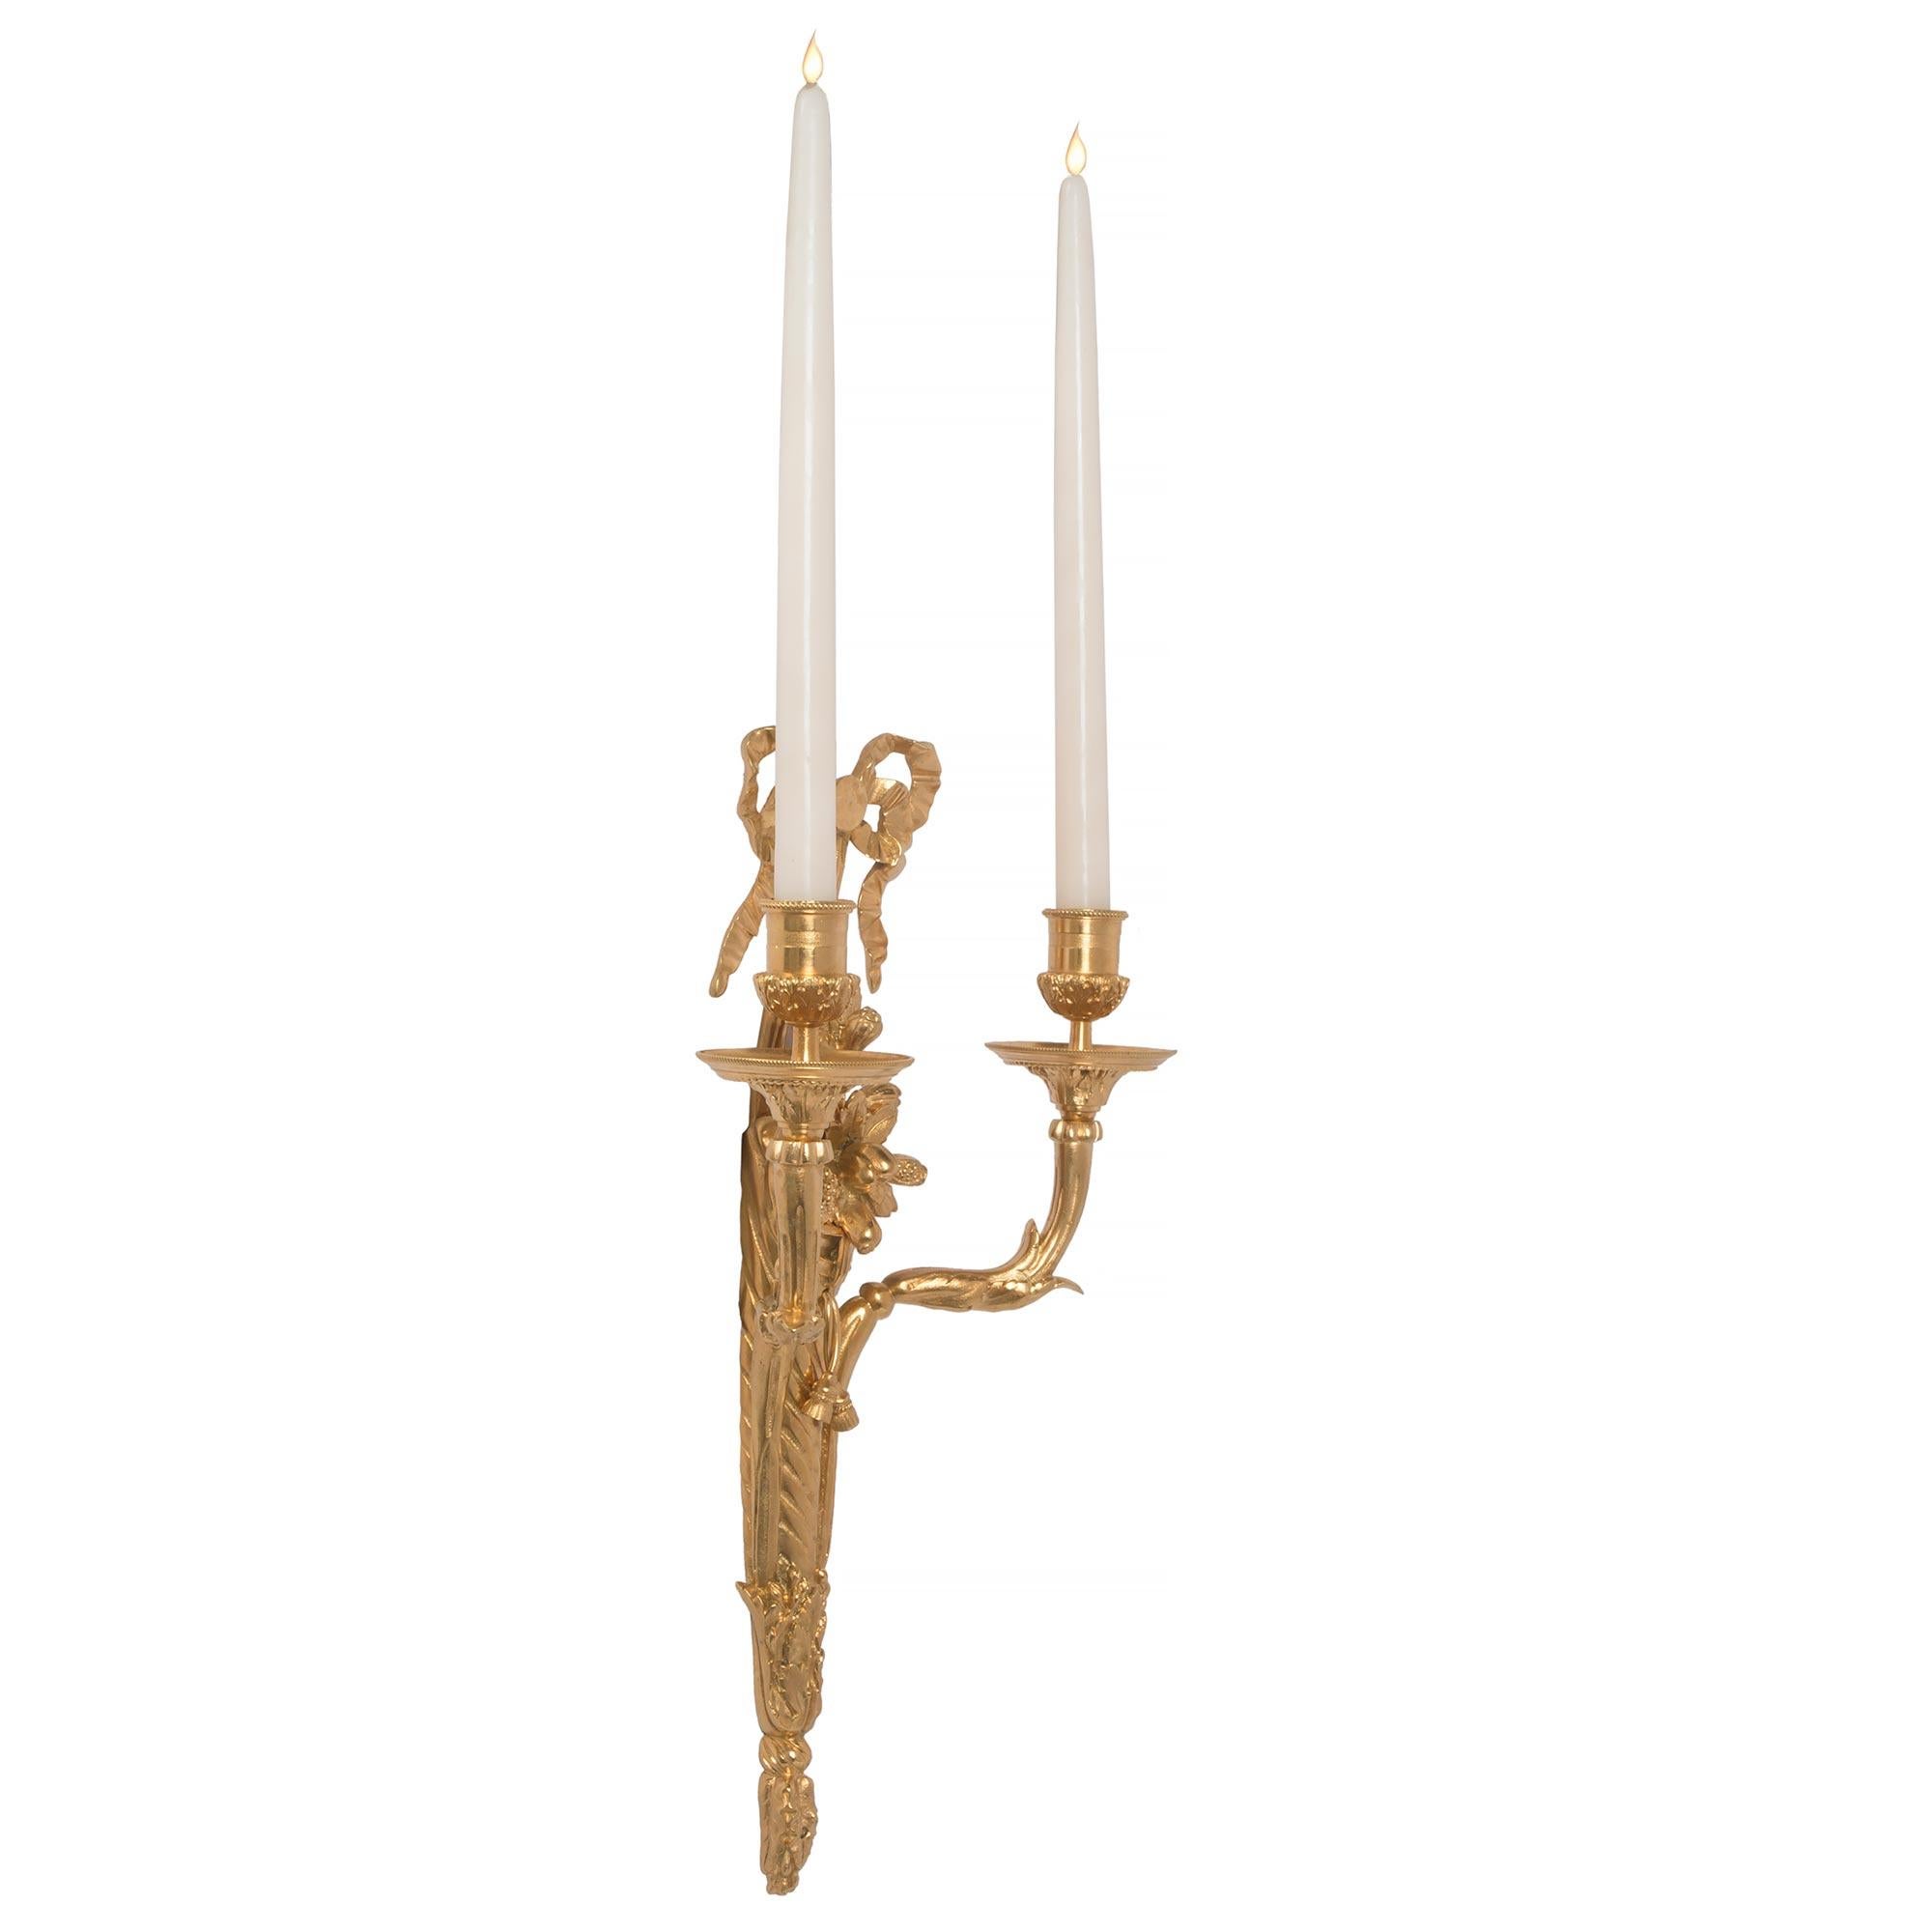 An extremely elegant pair of French 19th century Louis XVI St. ormolu two arm sconces. Each sconce is centered by a beautiful foliate finial below the twisted central support. Each S-scrolled arm is decorated with large acanthus leaves and Fine